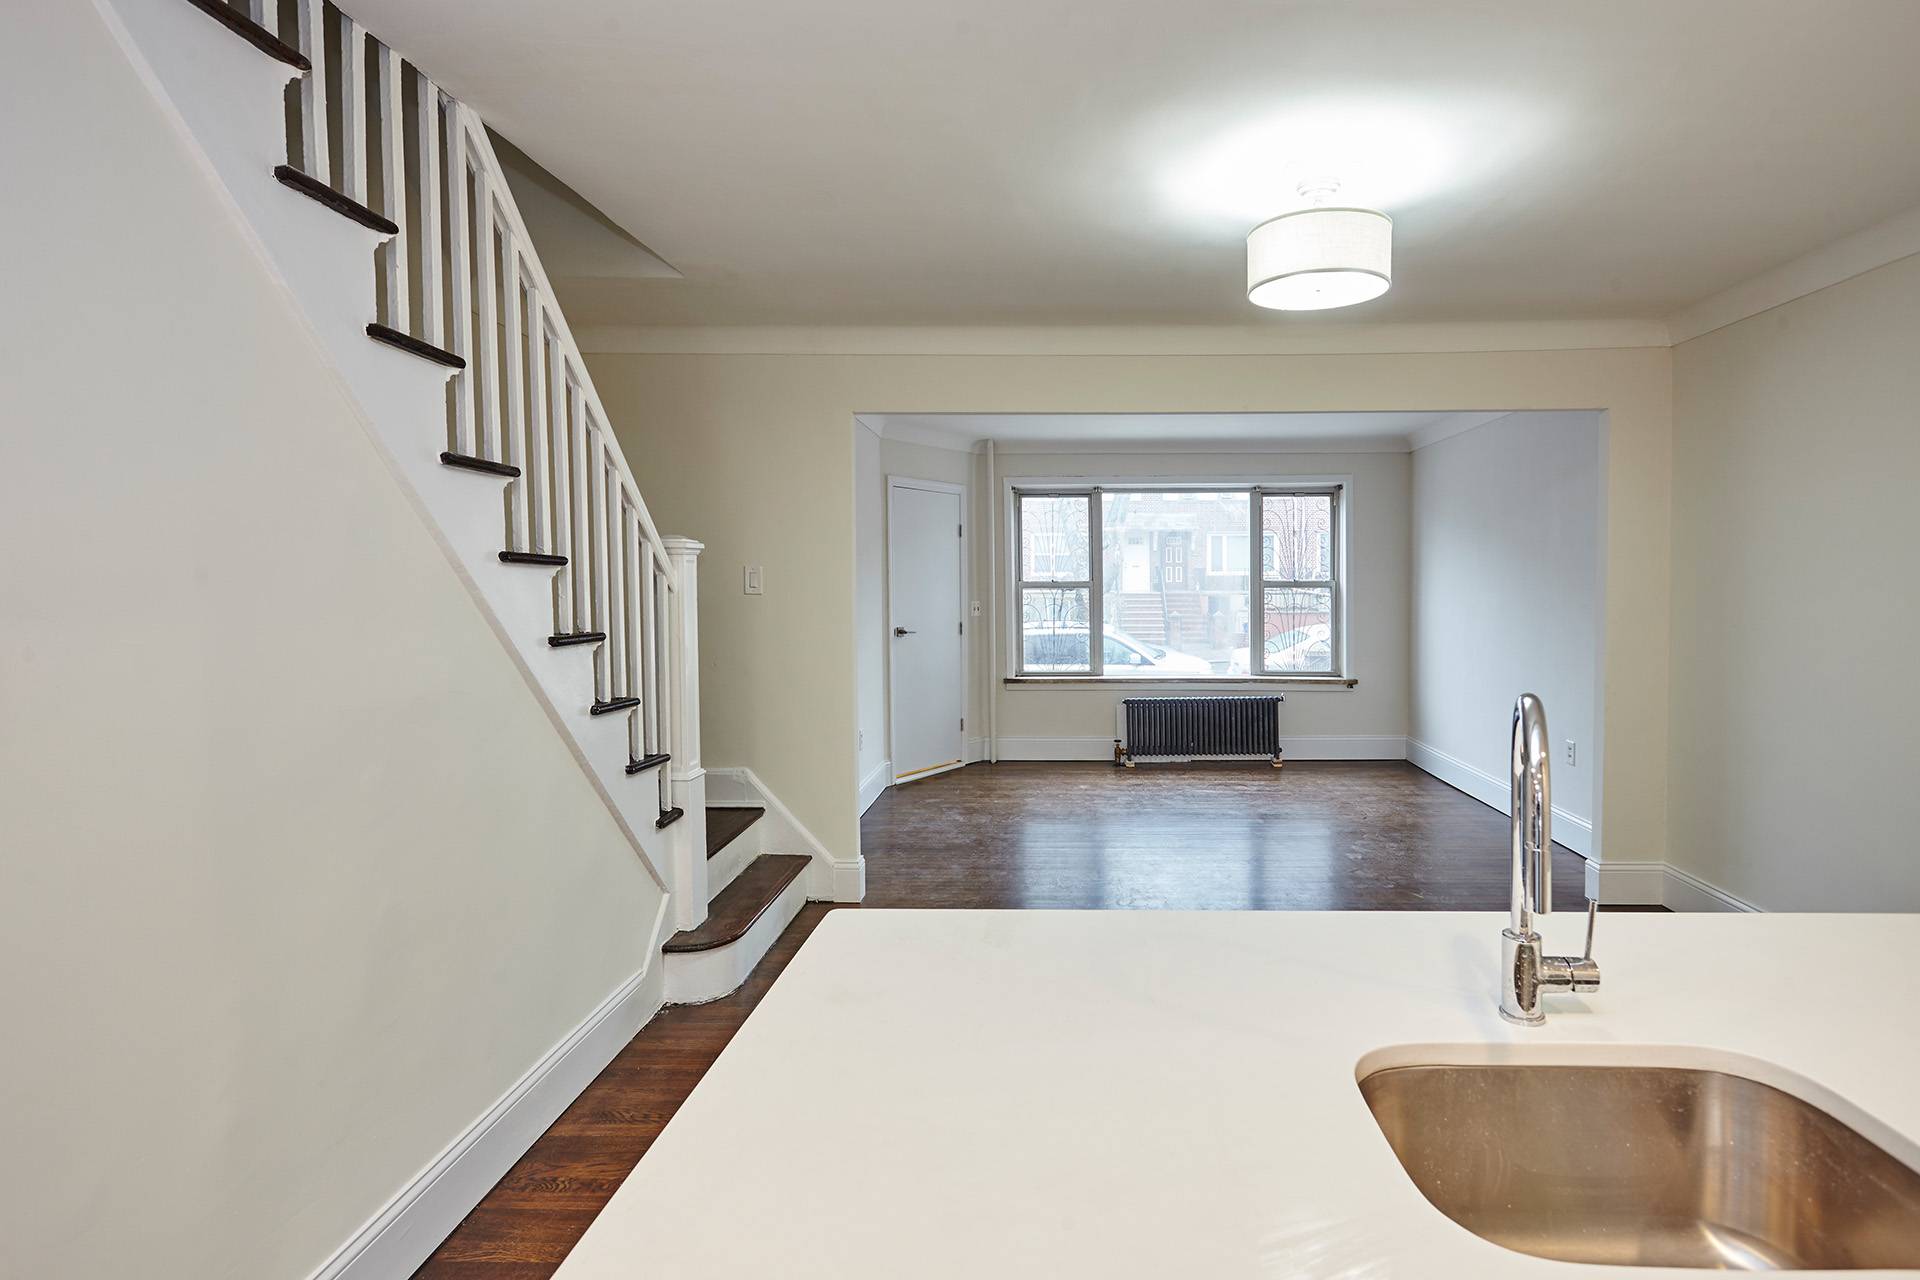 Astoria: Gut Renovated Chef's Kitchen Duplex 2 BR with Private Backyard & Parking Included!